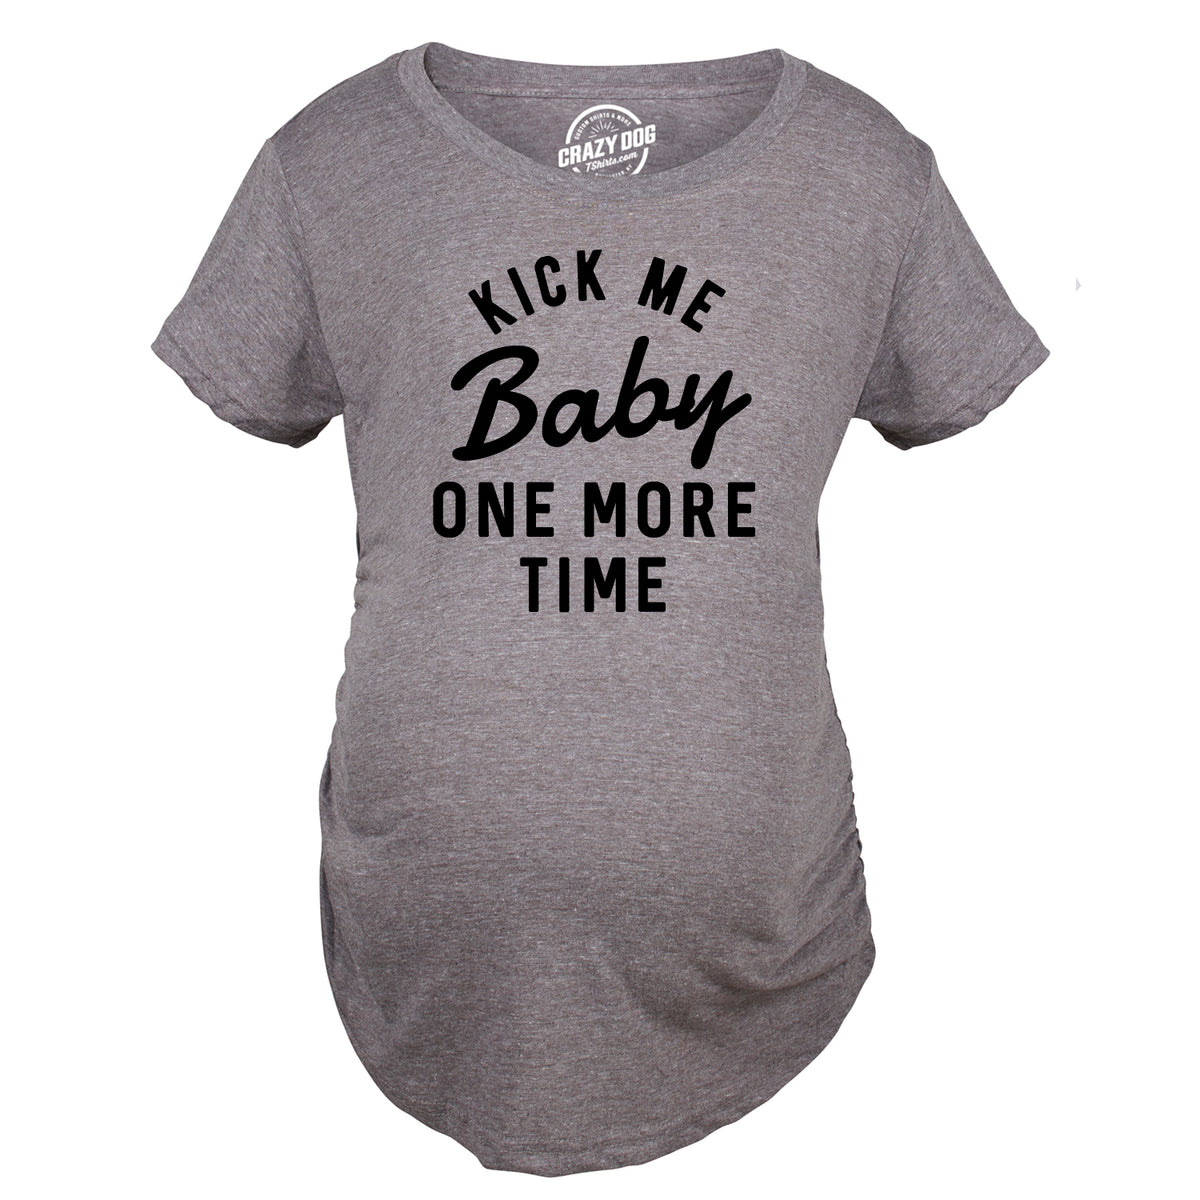 Kick Me Baby One More Time Maternity T Shirt